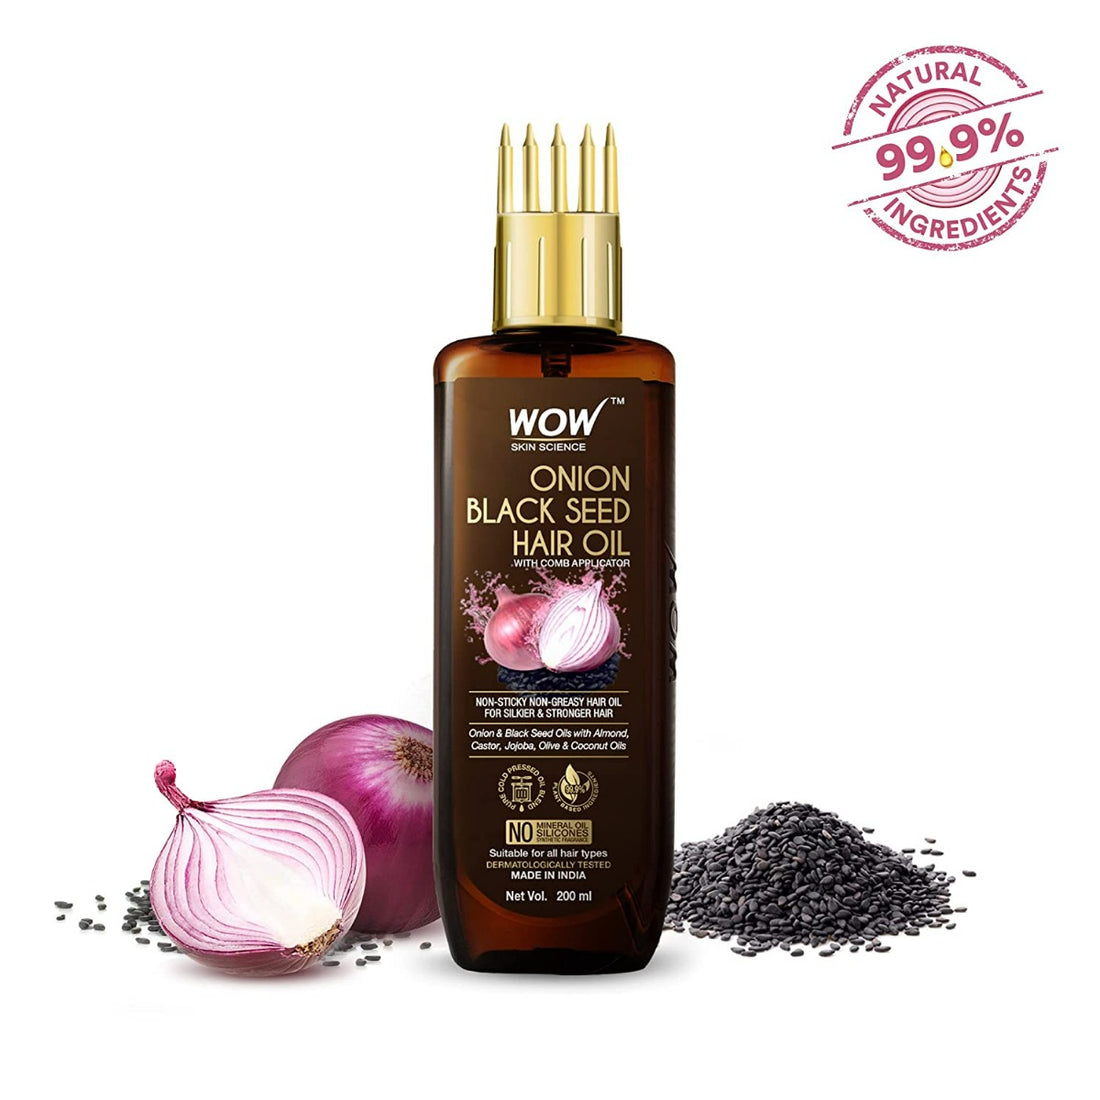 Wow Skin Science Onion Black Seed Hair Oil With Comb